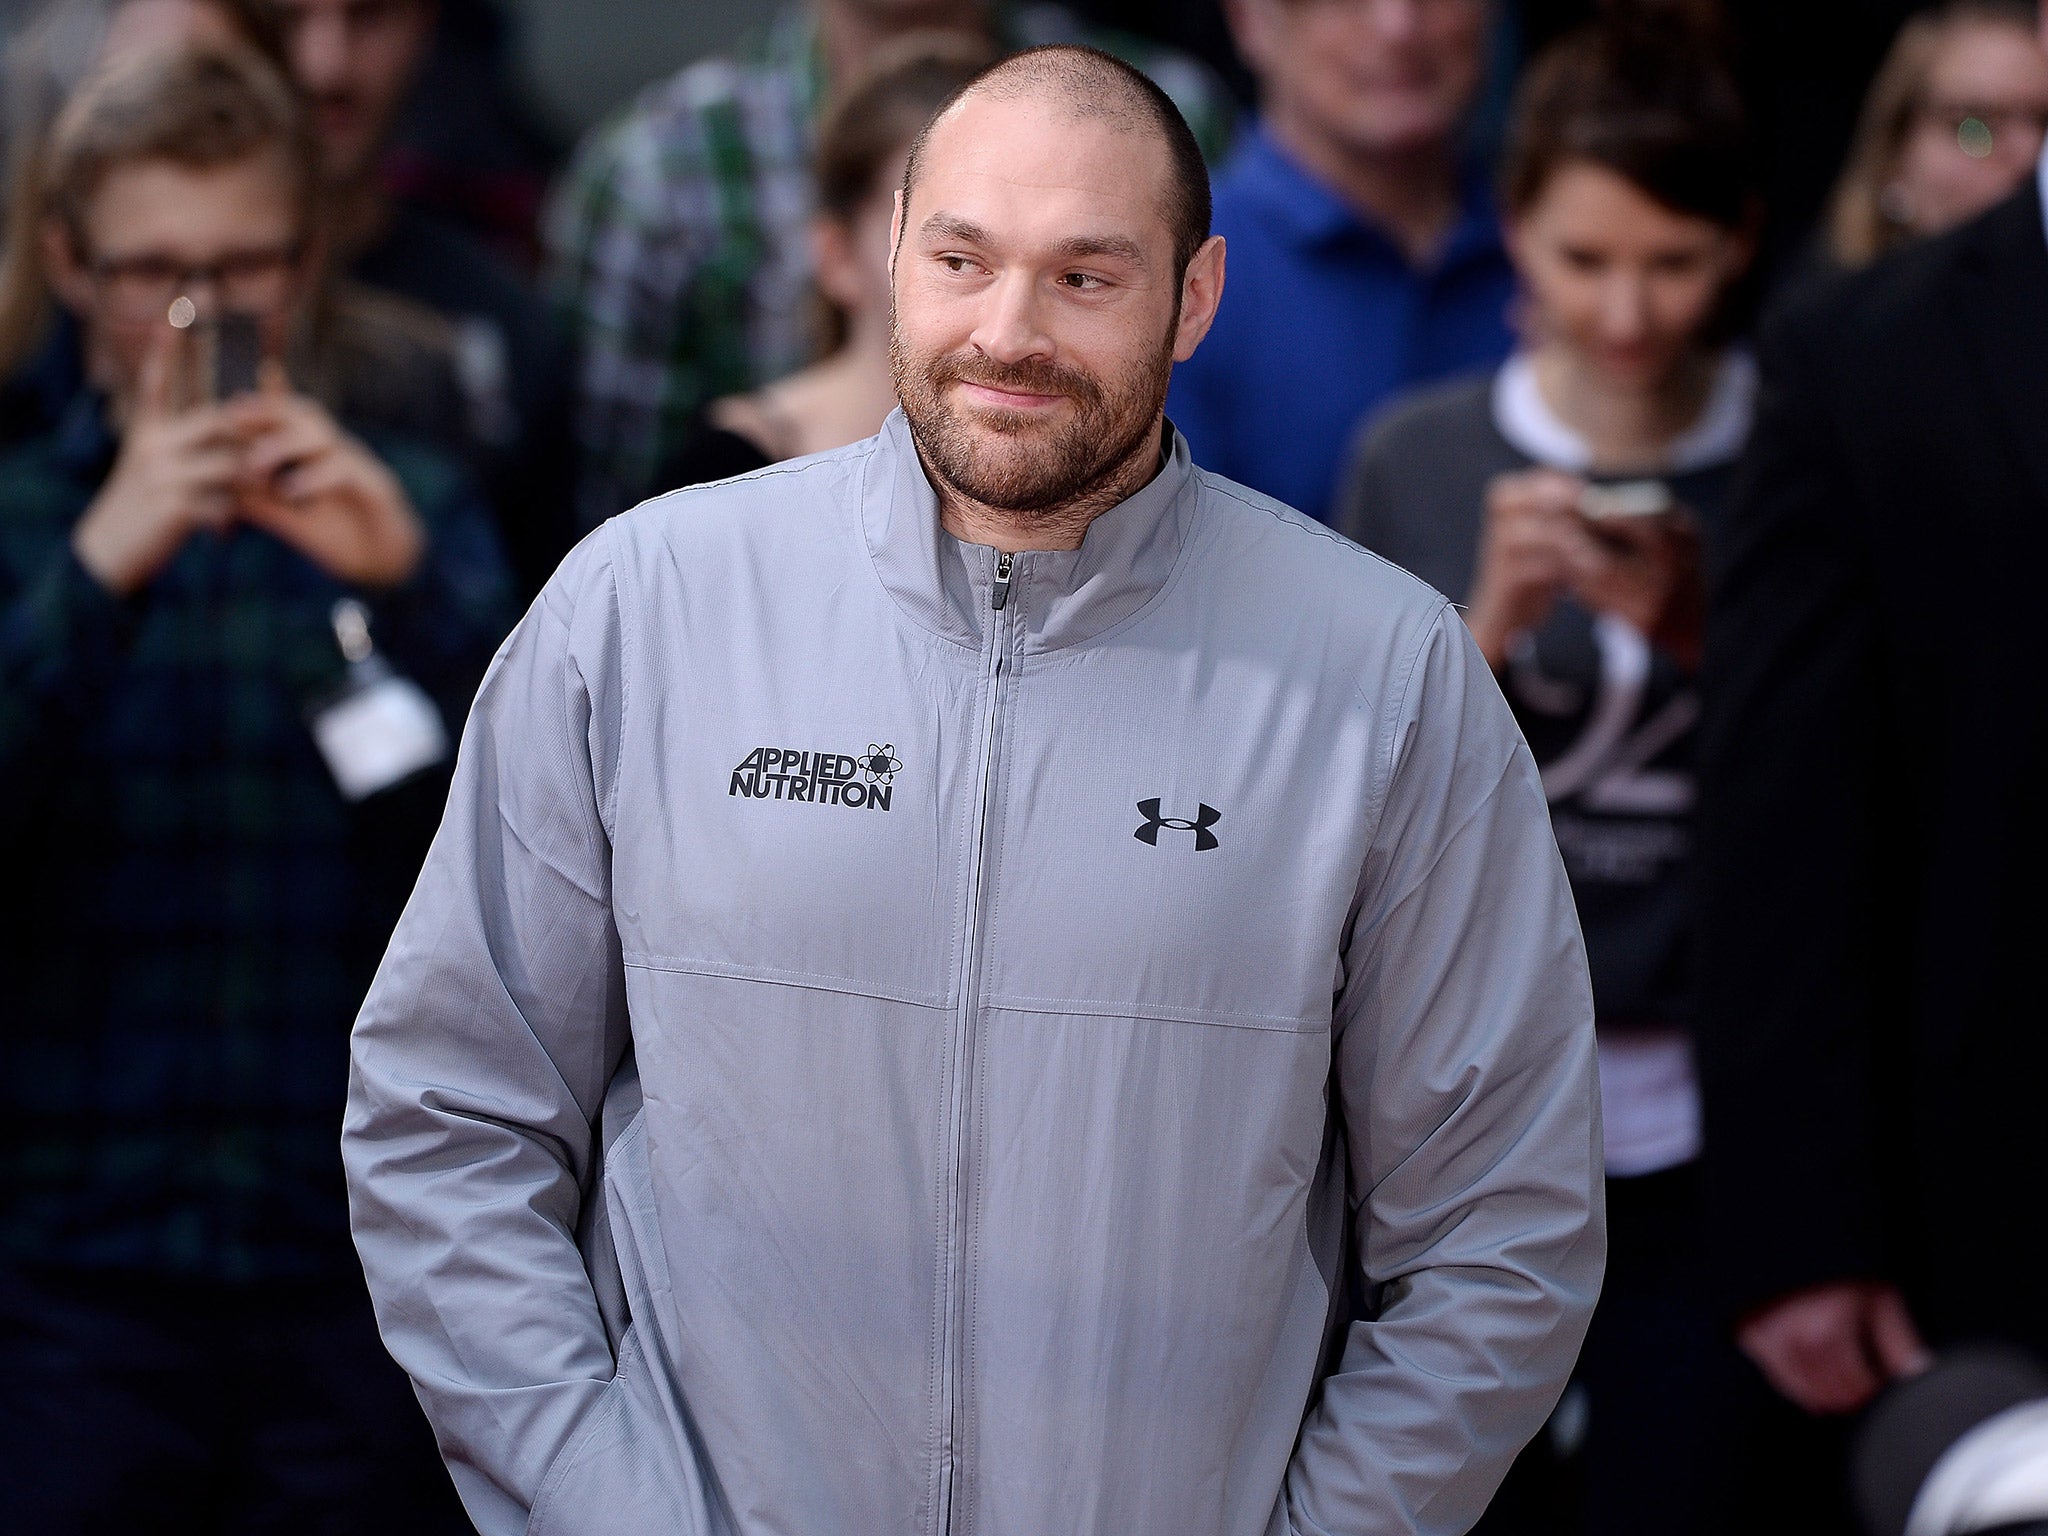 Tyson Fury has denied allegations of failing a drugs test